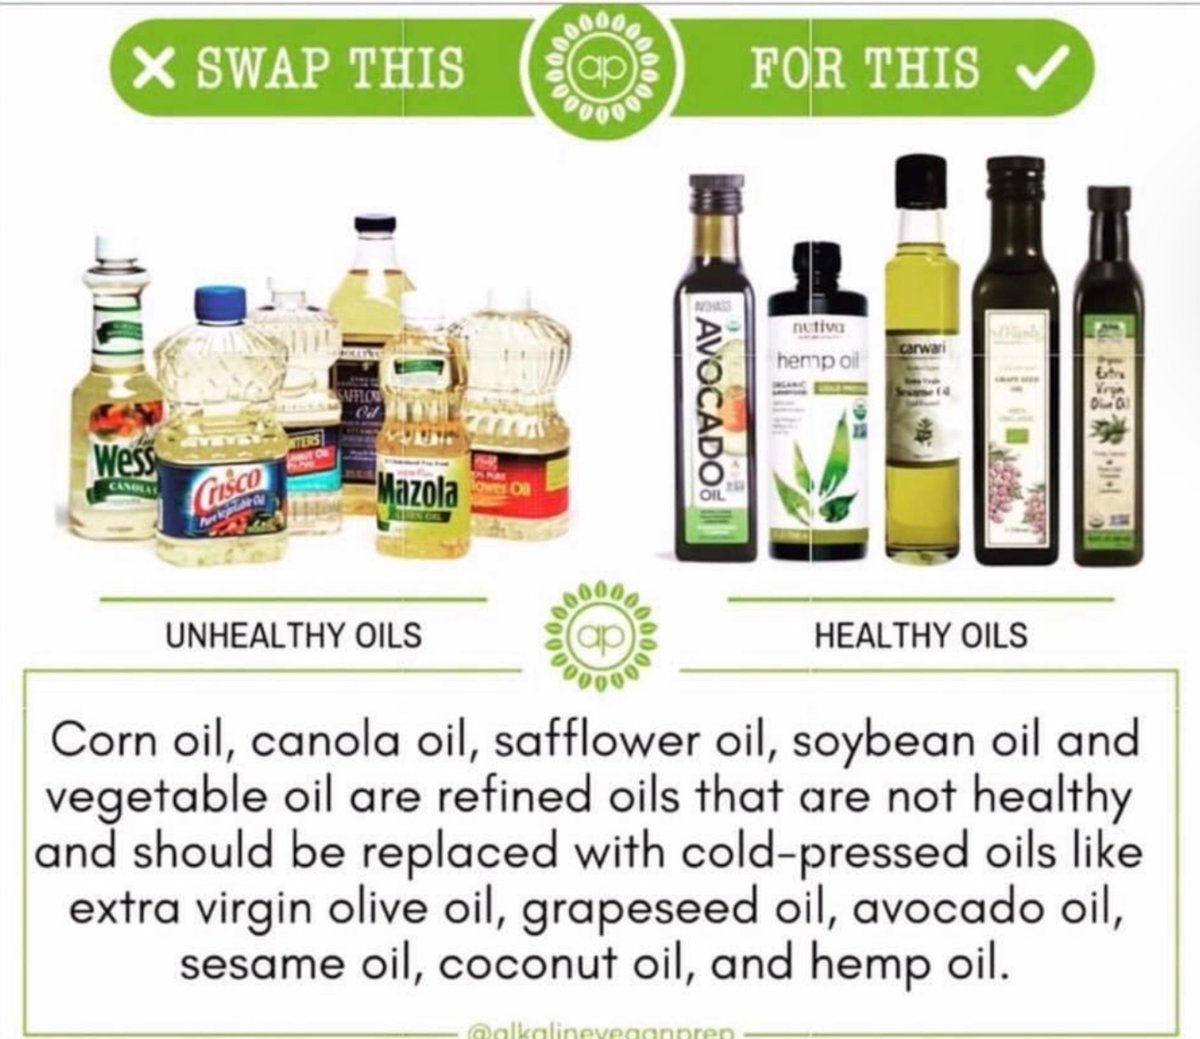 'Not all oils are created equal '  #nutrition #wellness #wellnessblog #plantbased #plantmedicine #plantbasednutrition #healthyself #foodismedicine #healthyliving #healthylifestyle #wellnesswarrior #healthylivingtips #healingwithfood #healthy #healthyfood